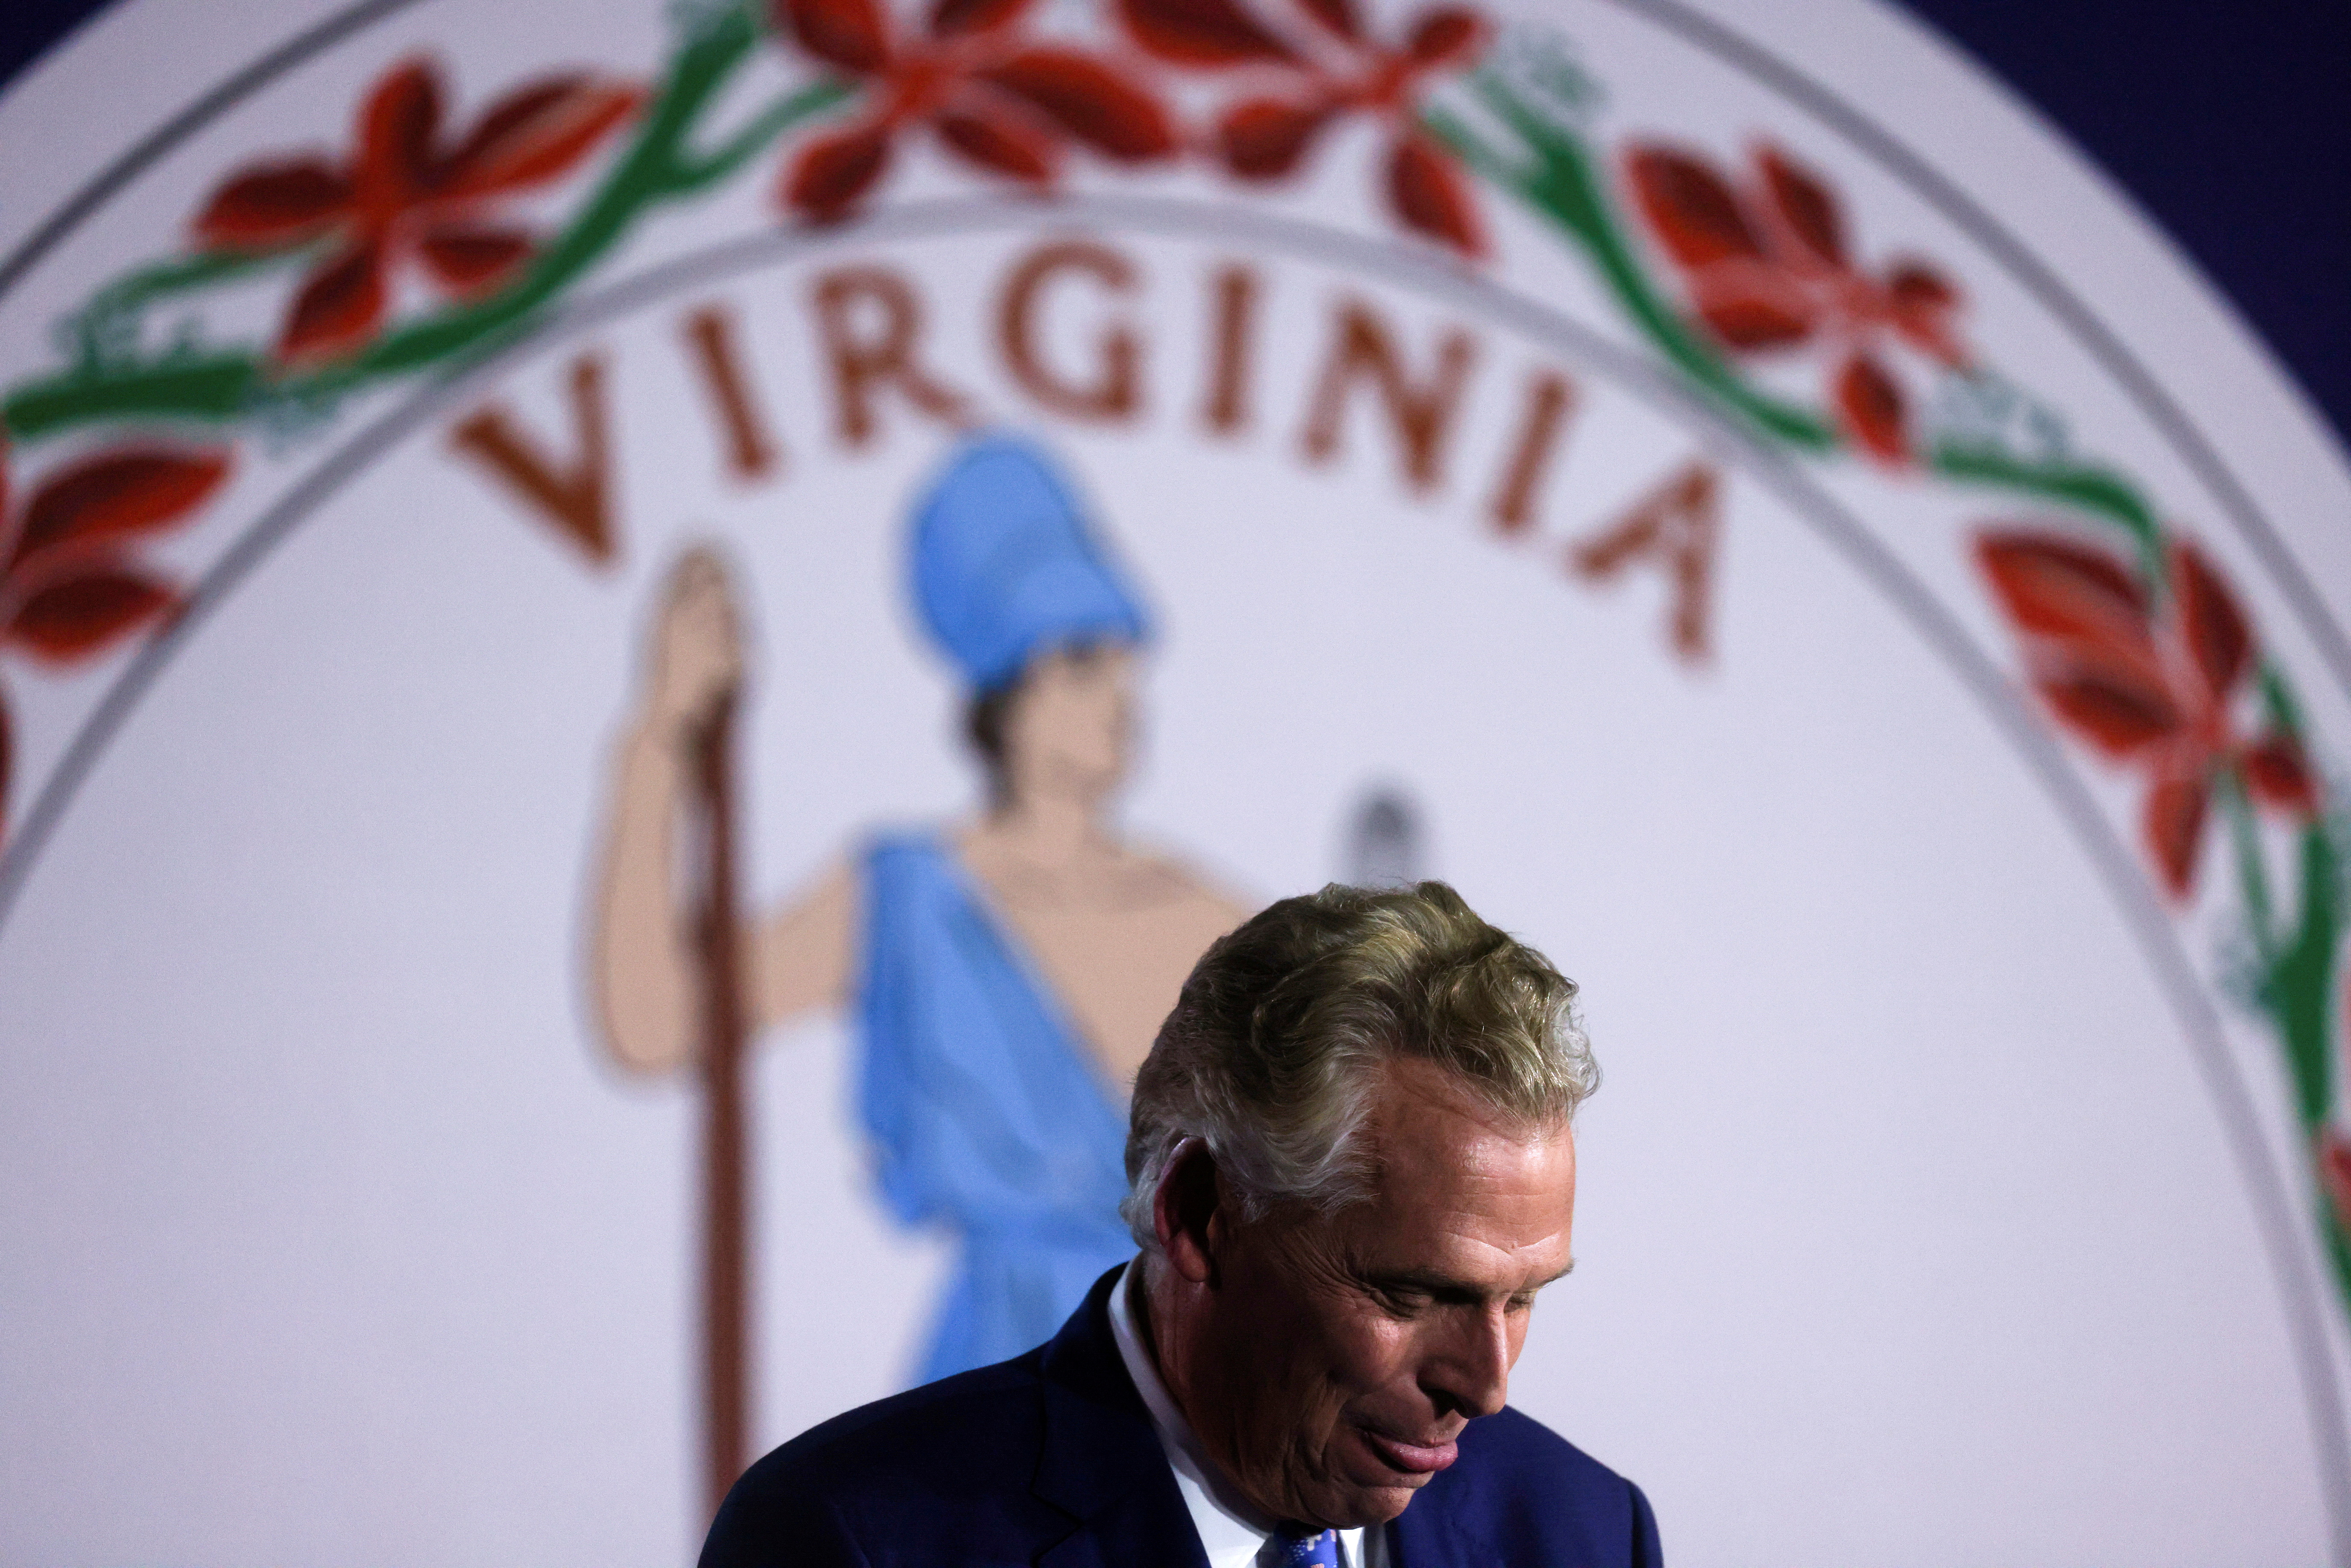 Democratic nominee for Virginia Governor Terry McAuliffe looks on as he addresses supporters during an election night party and rally in McLean, Virginia, U.S., November 2, 2021. REUTERS/Leah Millis    